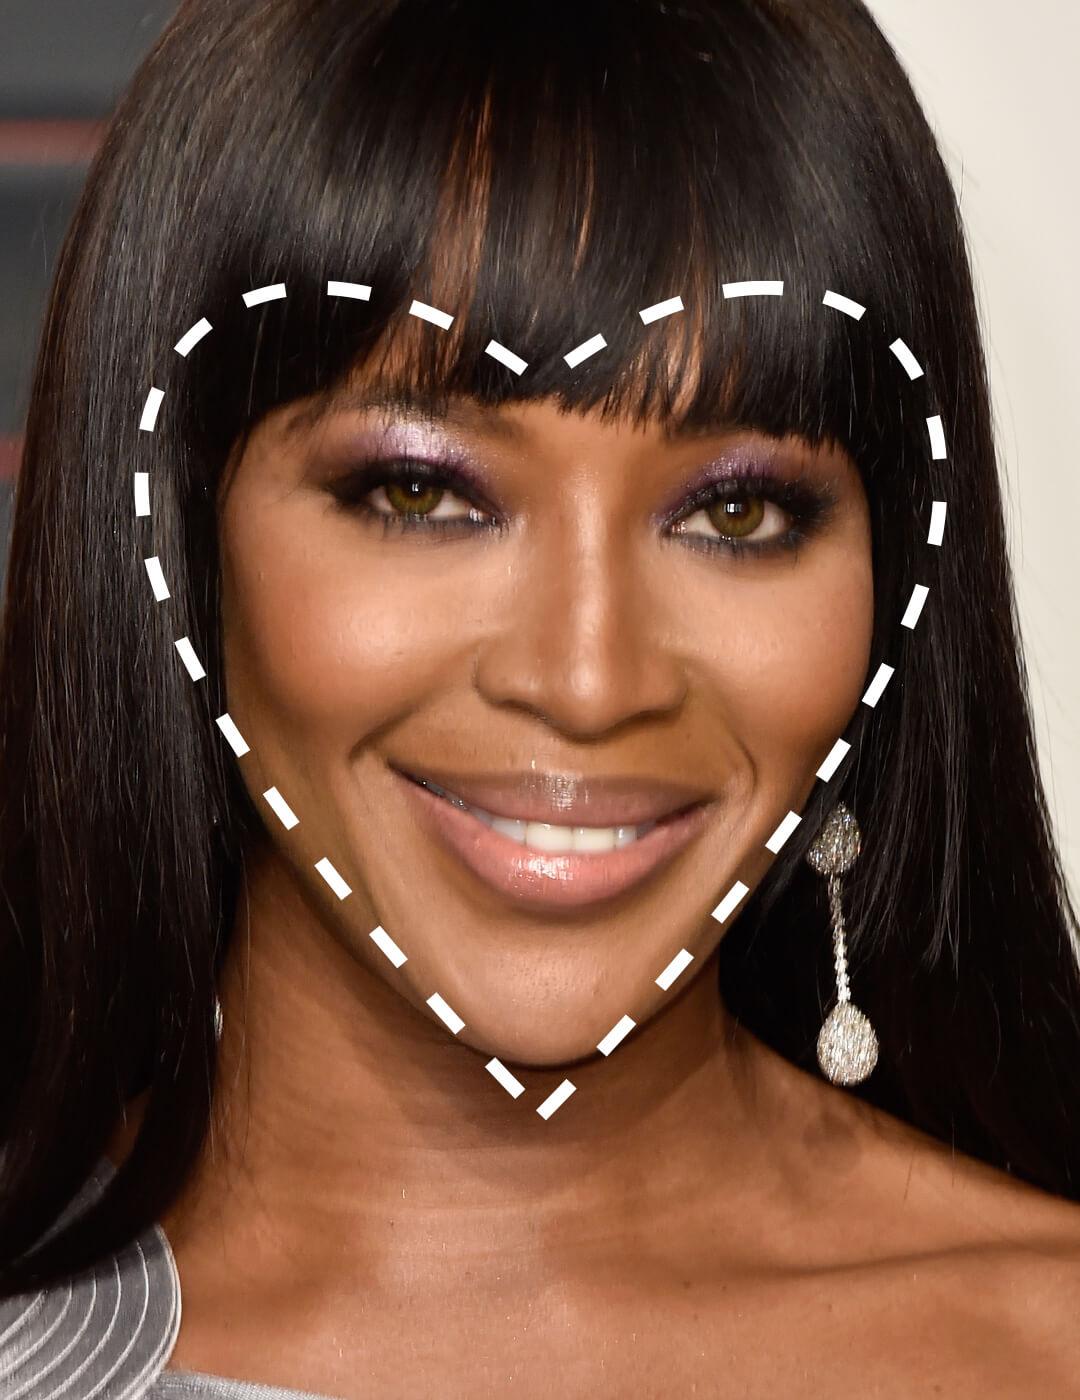 Close-up of a smiling Naomi Campbell with a broken line heart shape overlay